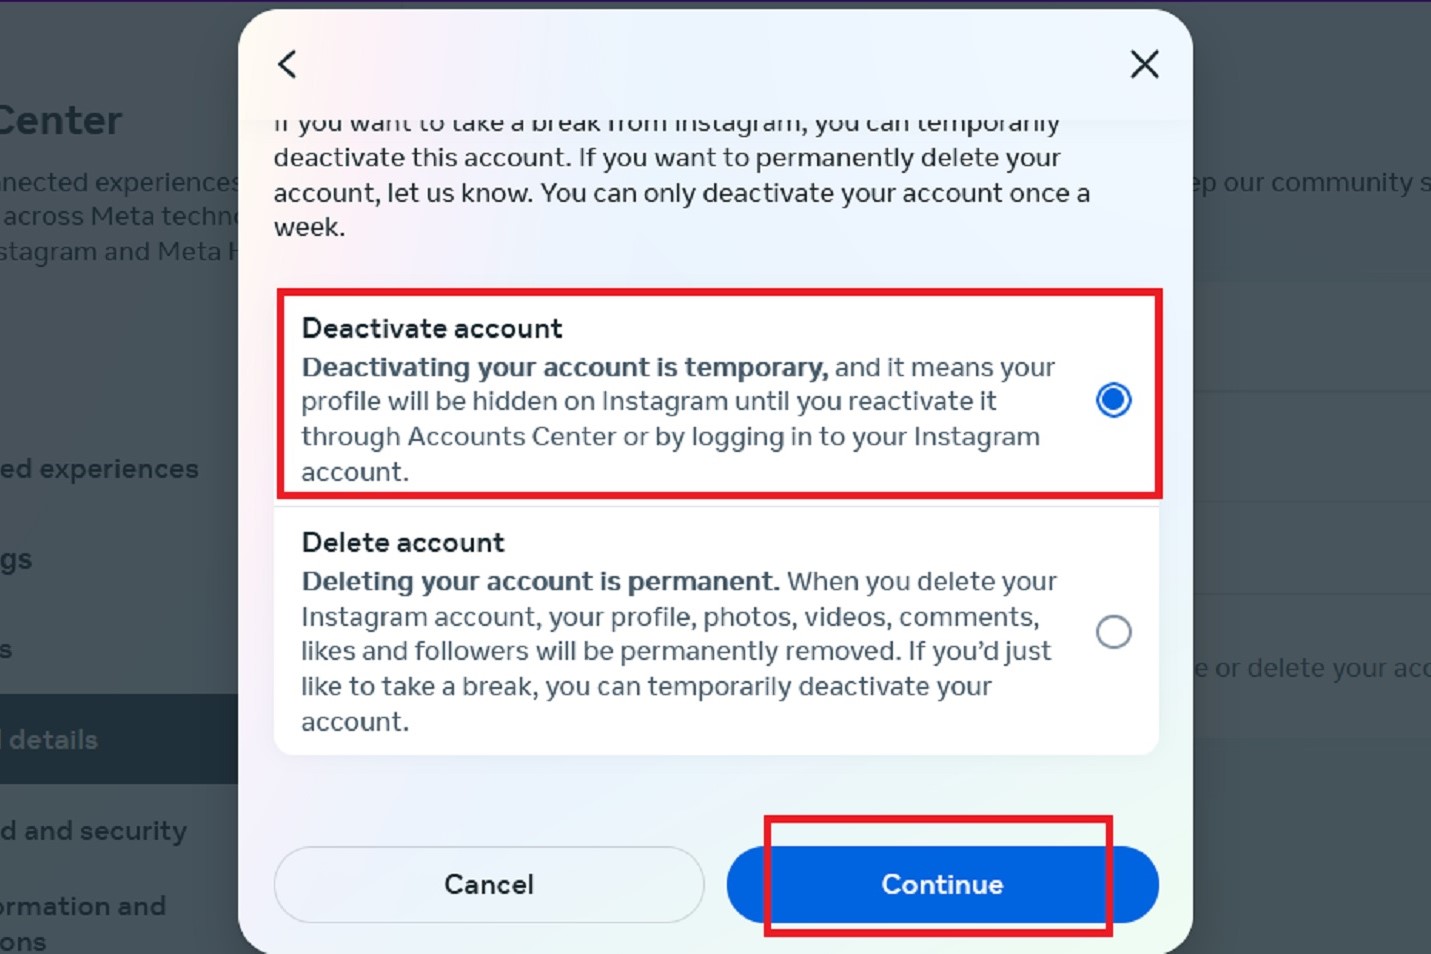 Selecting the Deactivate account option.